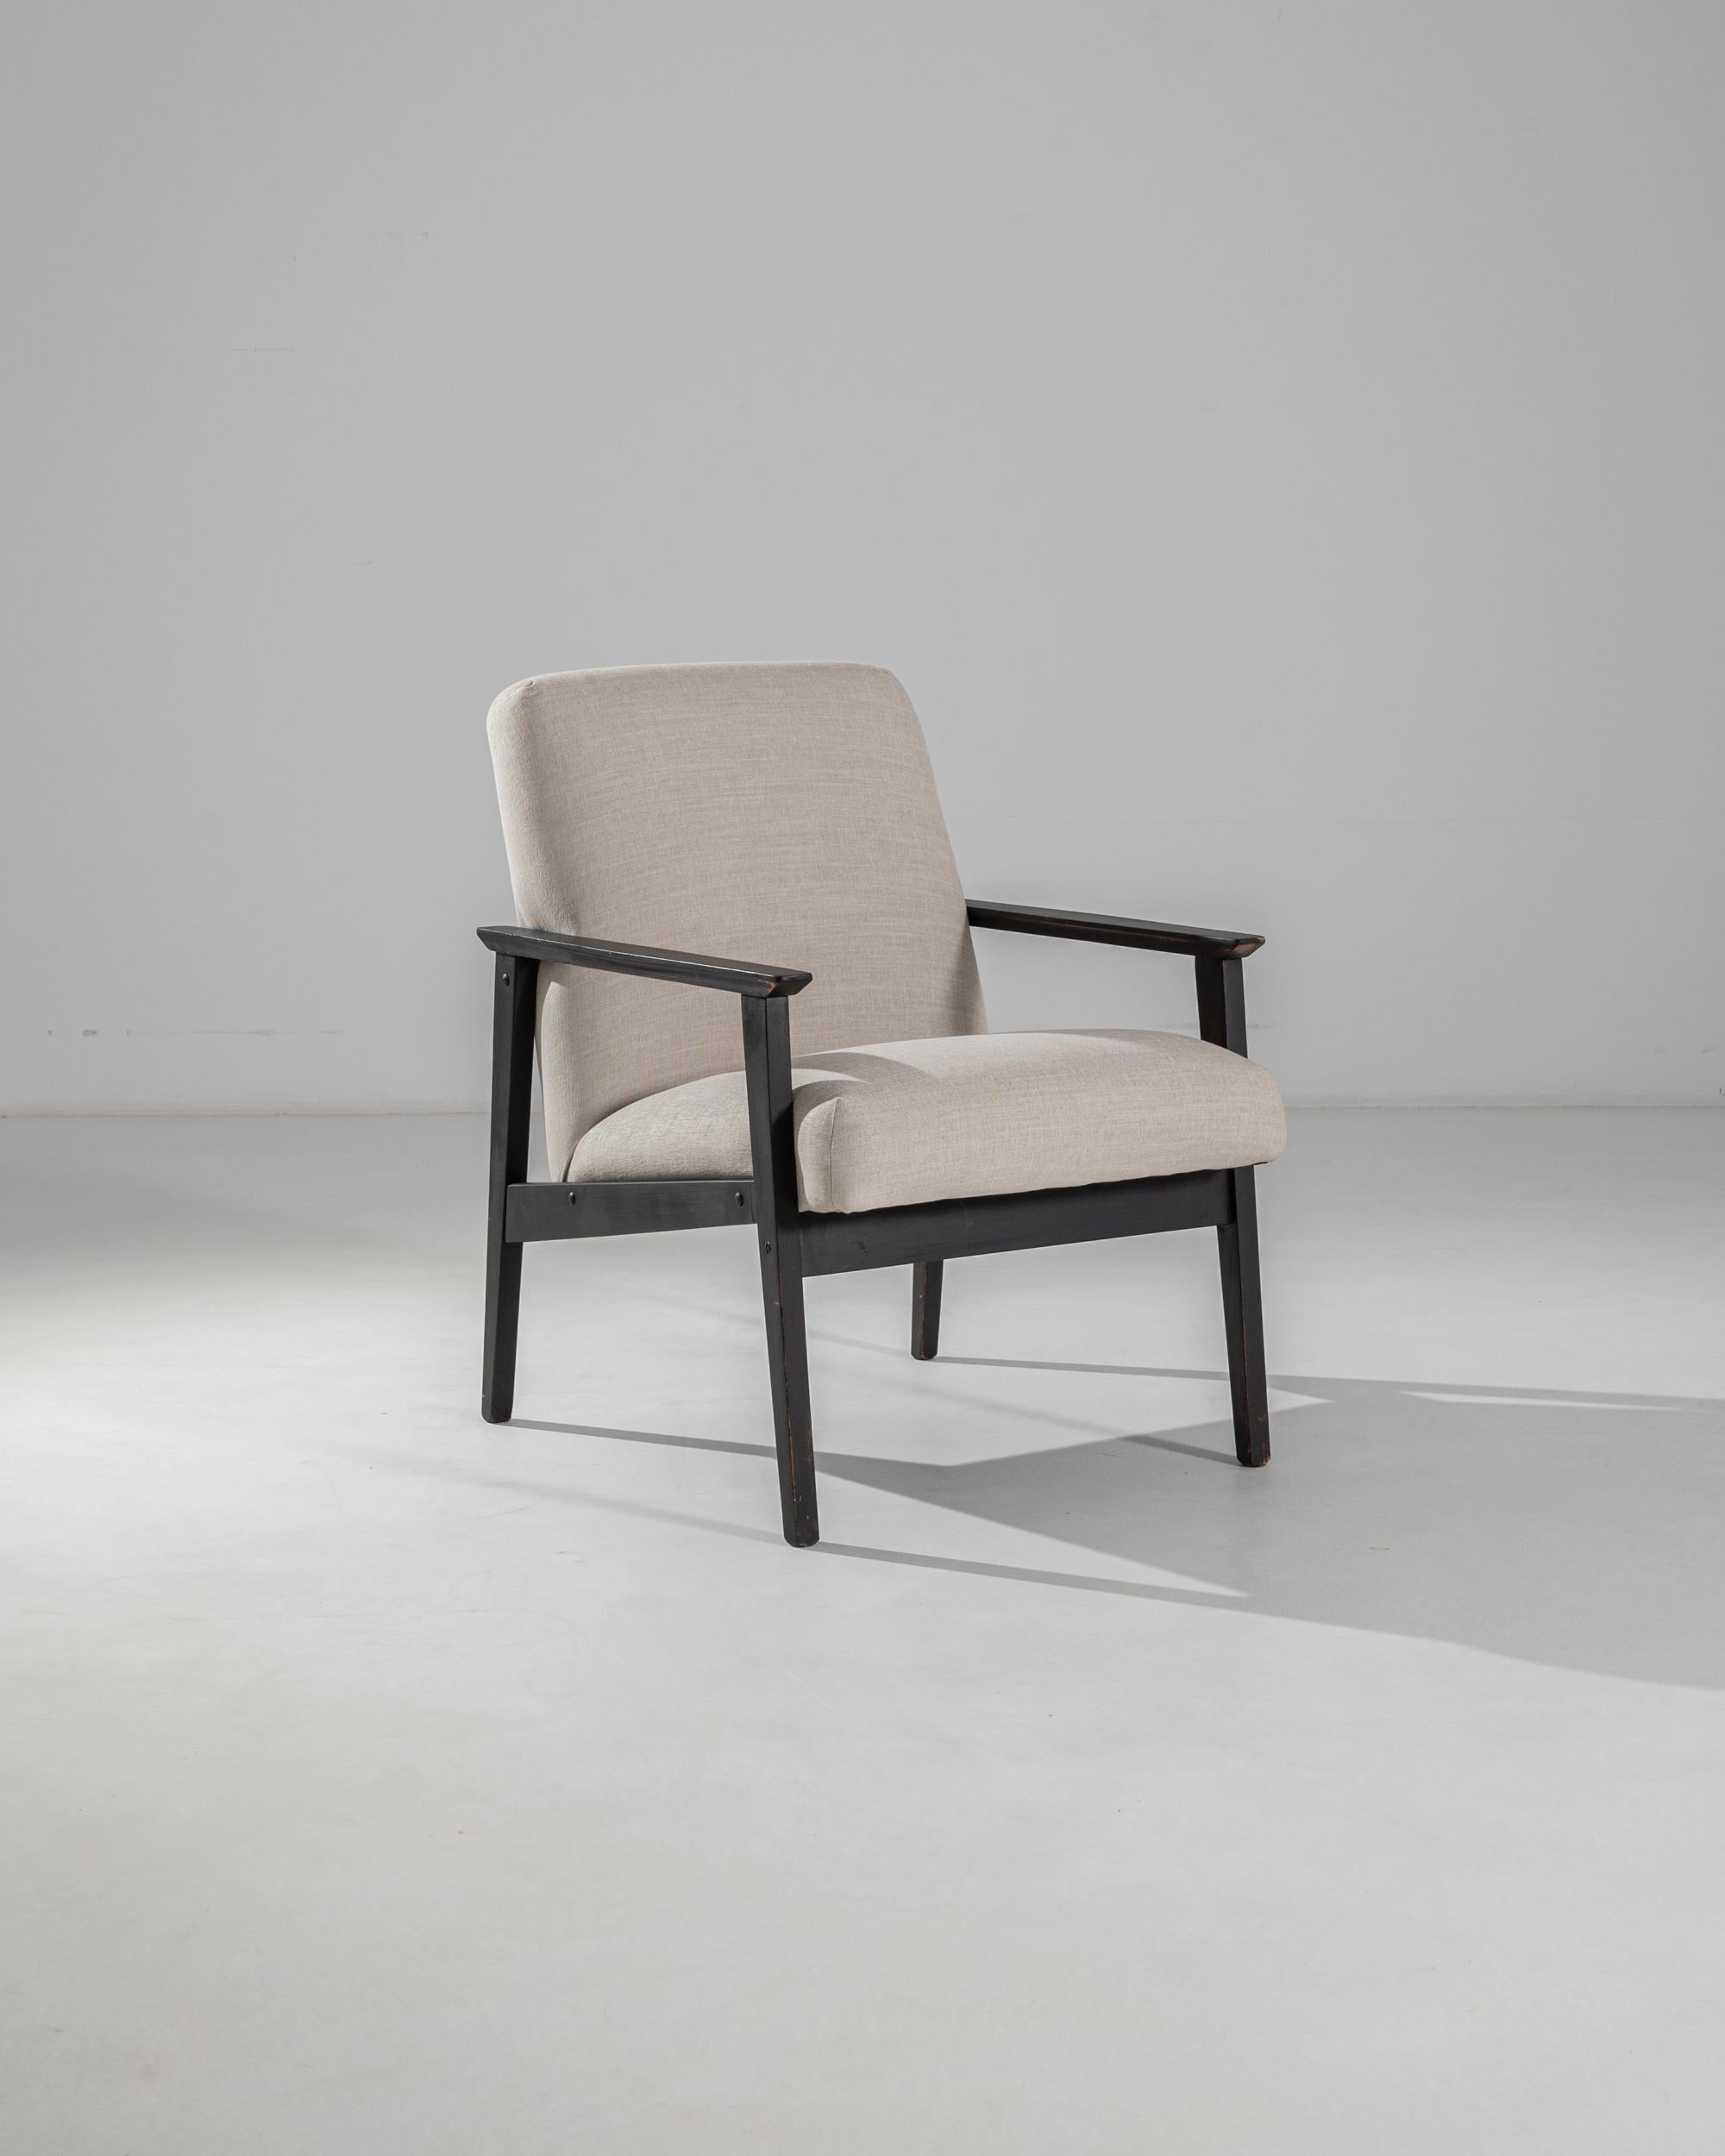 This upholstered armchair was produced in Czechia, circa 1960. Upholstered with a beige linen blend, the slight recline and cushioned seat make for a comfortable posture. Contrasting with the angular dark coffee frame, the plush seat creates a